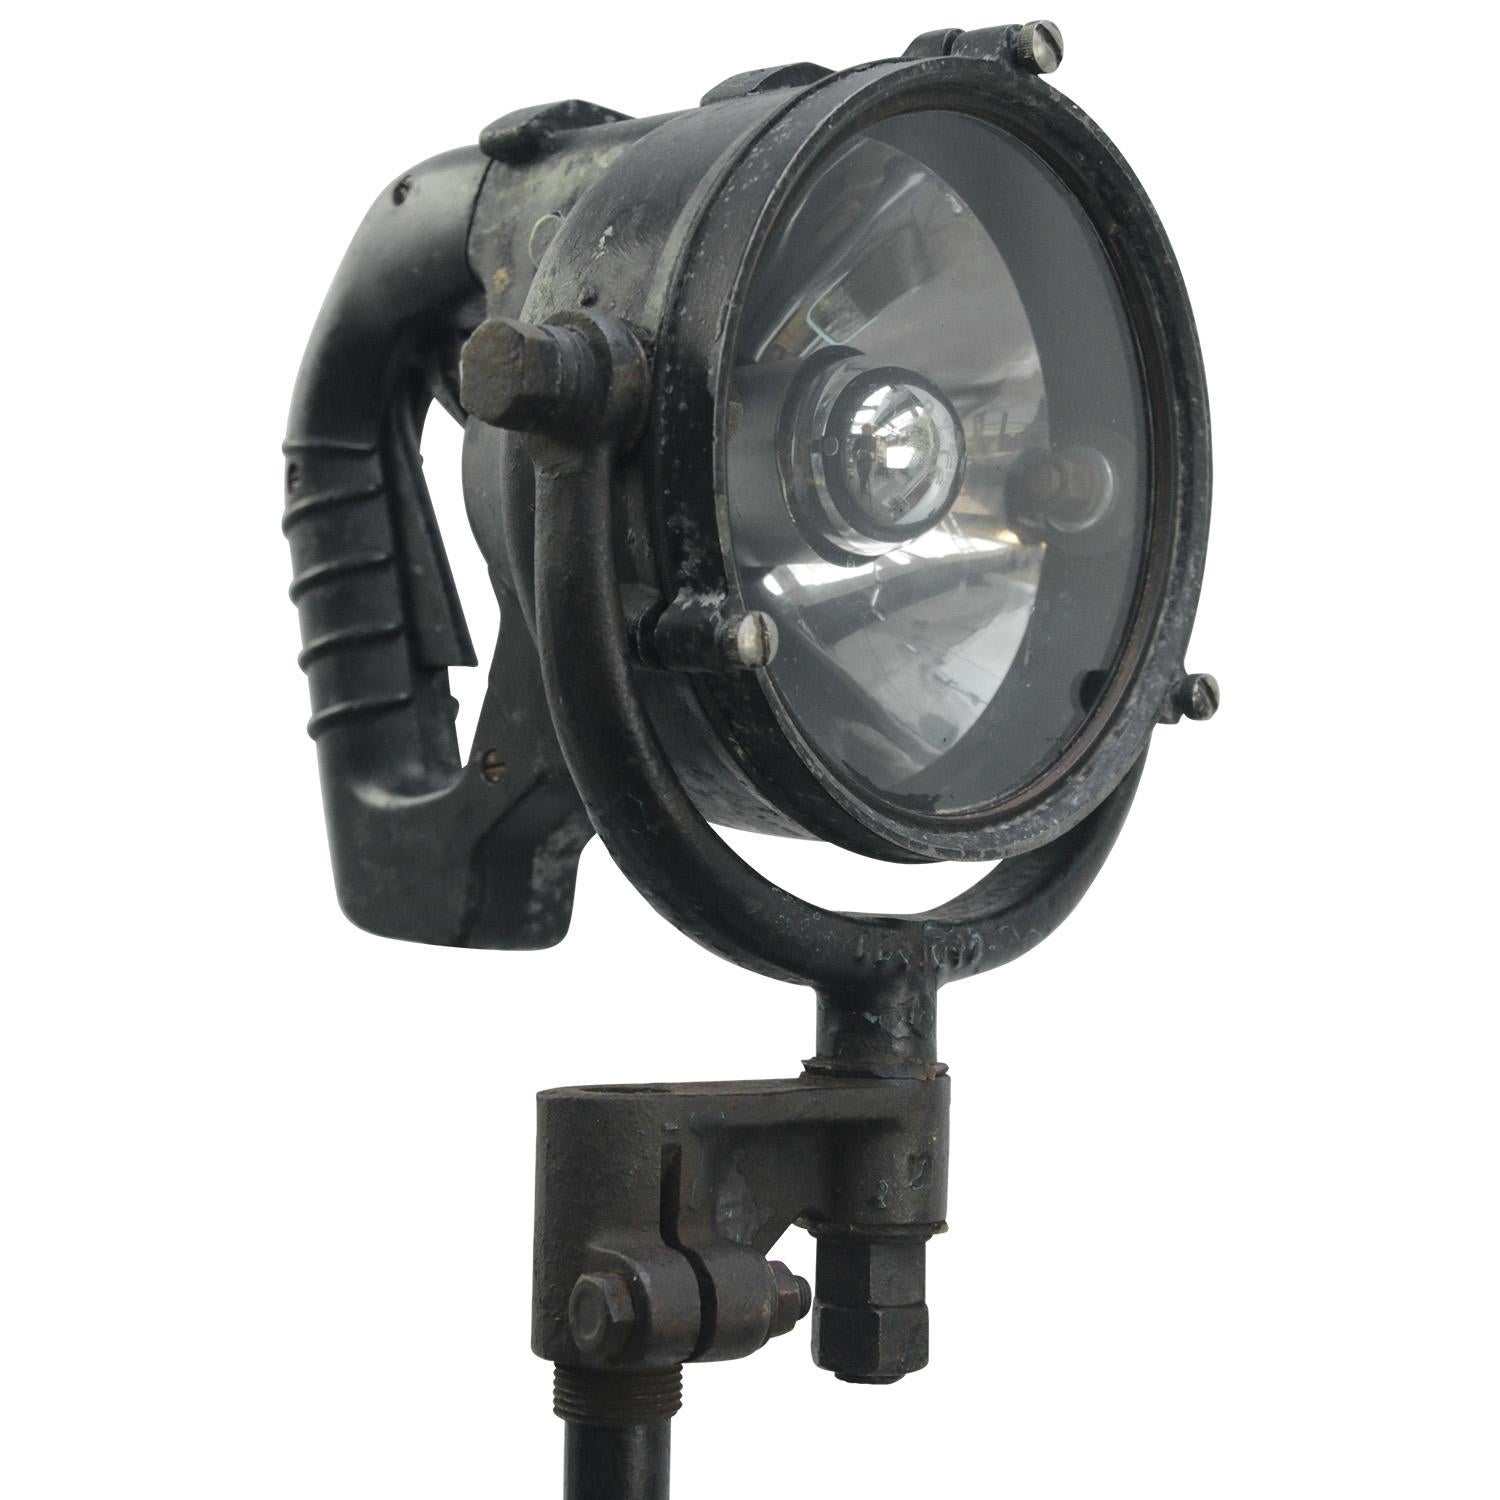 Black metal navy lamp.
Morse code signal lamp

E14 bulb holder

Foot size 27 × 27 cm

Weight: 4.90 kg / 10.8 lb

E14 bulb holder. Priced per individual item. All lamps have been made suitable by international standards for incandescent